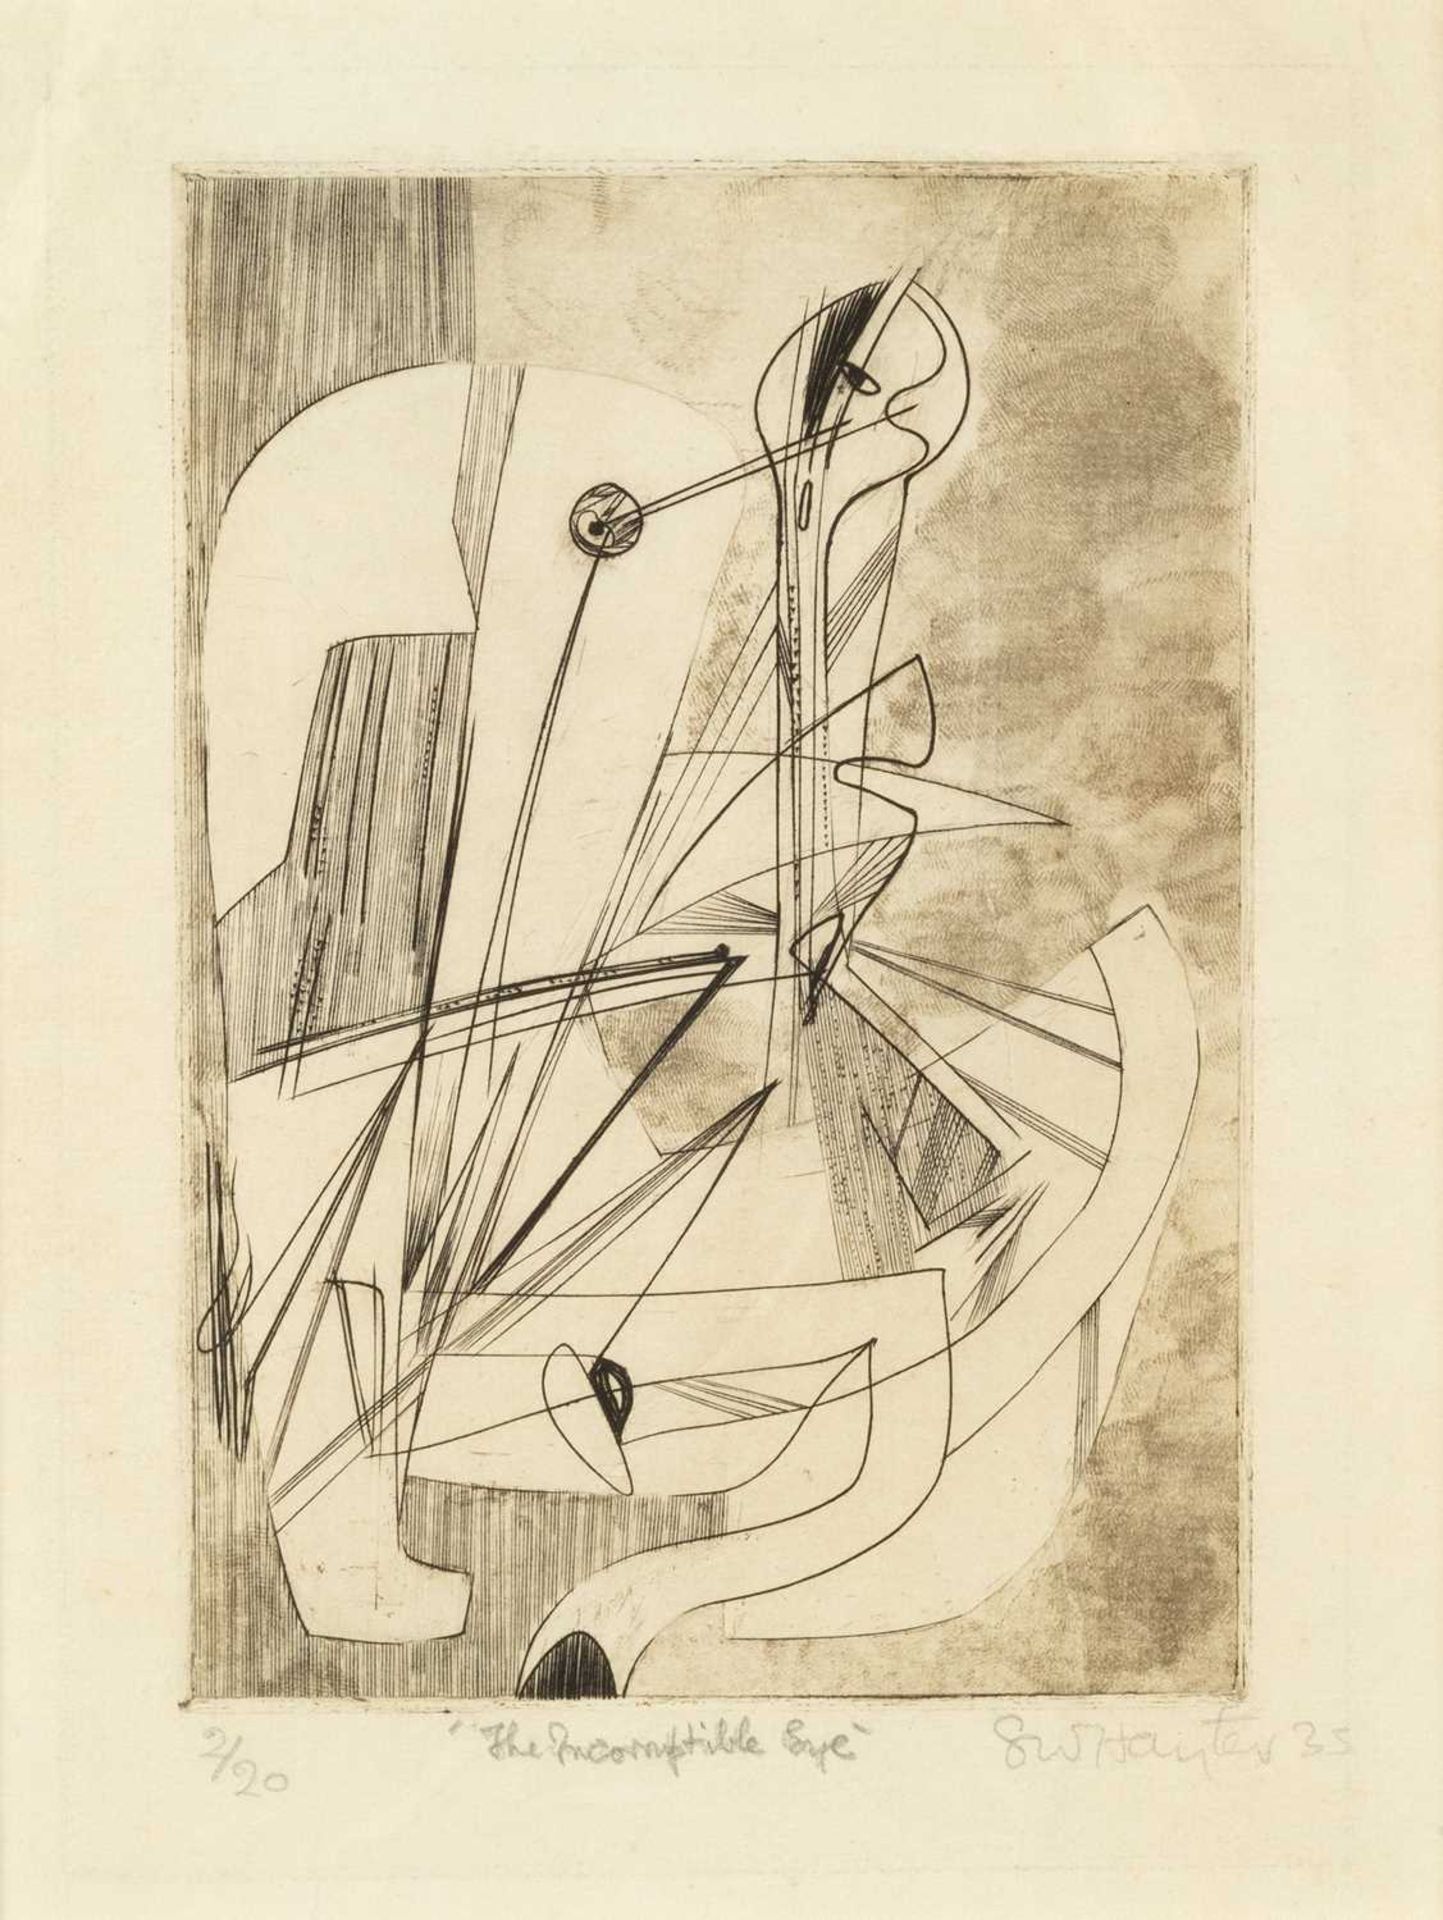 Stanley William Hayter (1901-1988) The Incorruptible Eye, 1935 2/20, signed, dated, titled, and